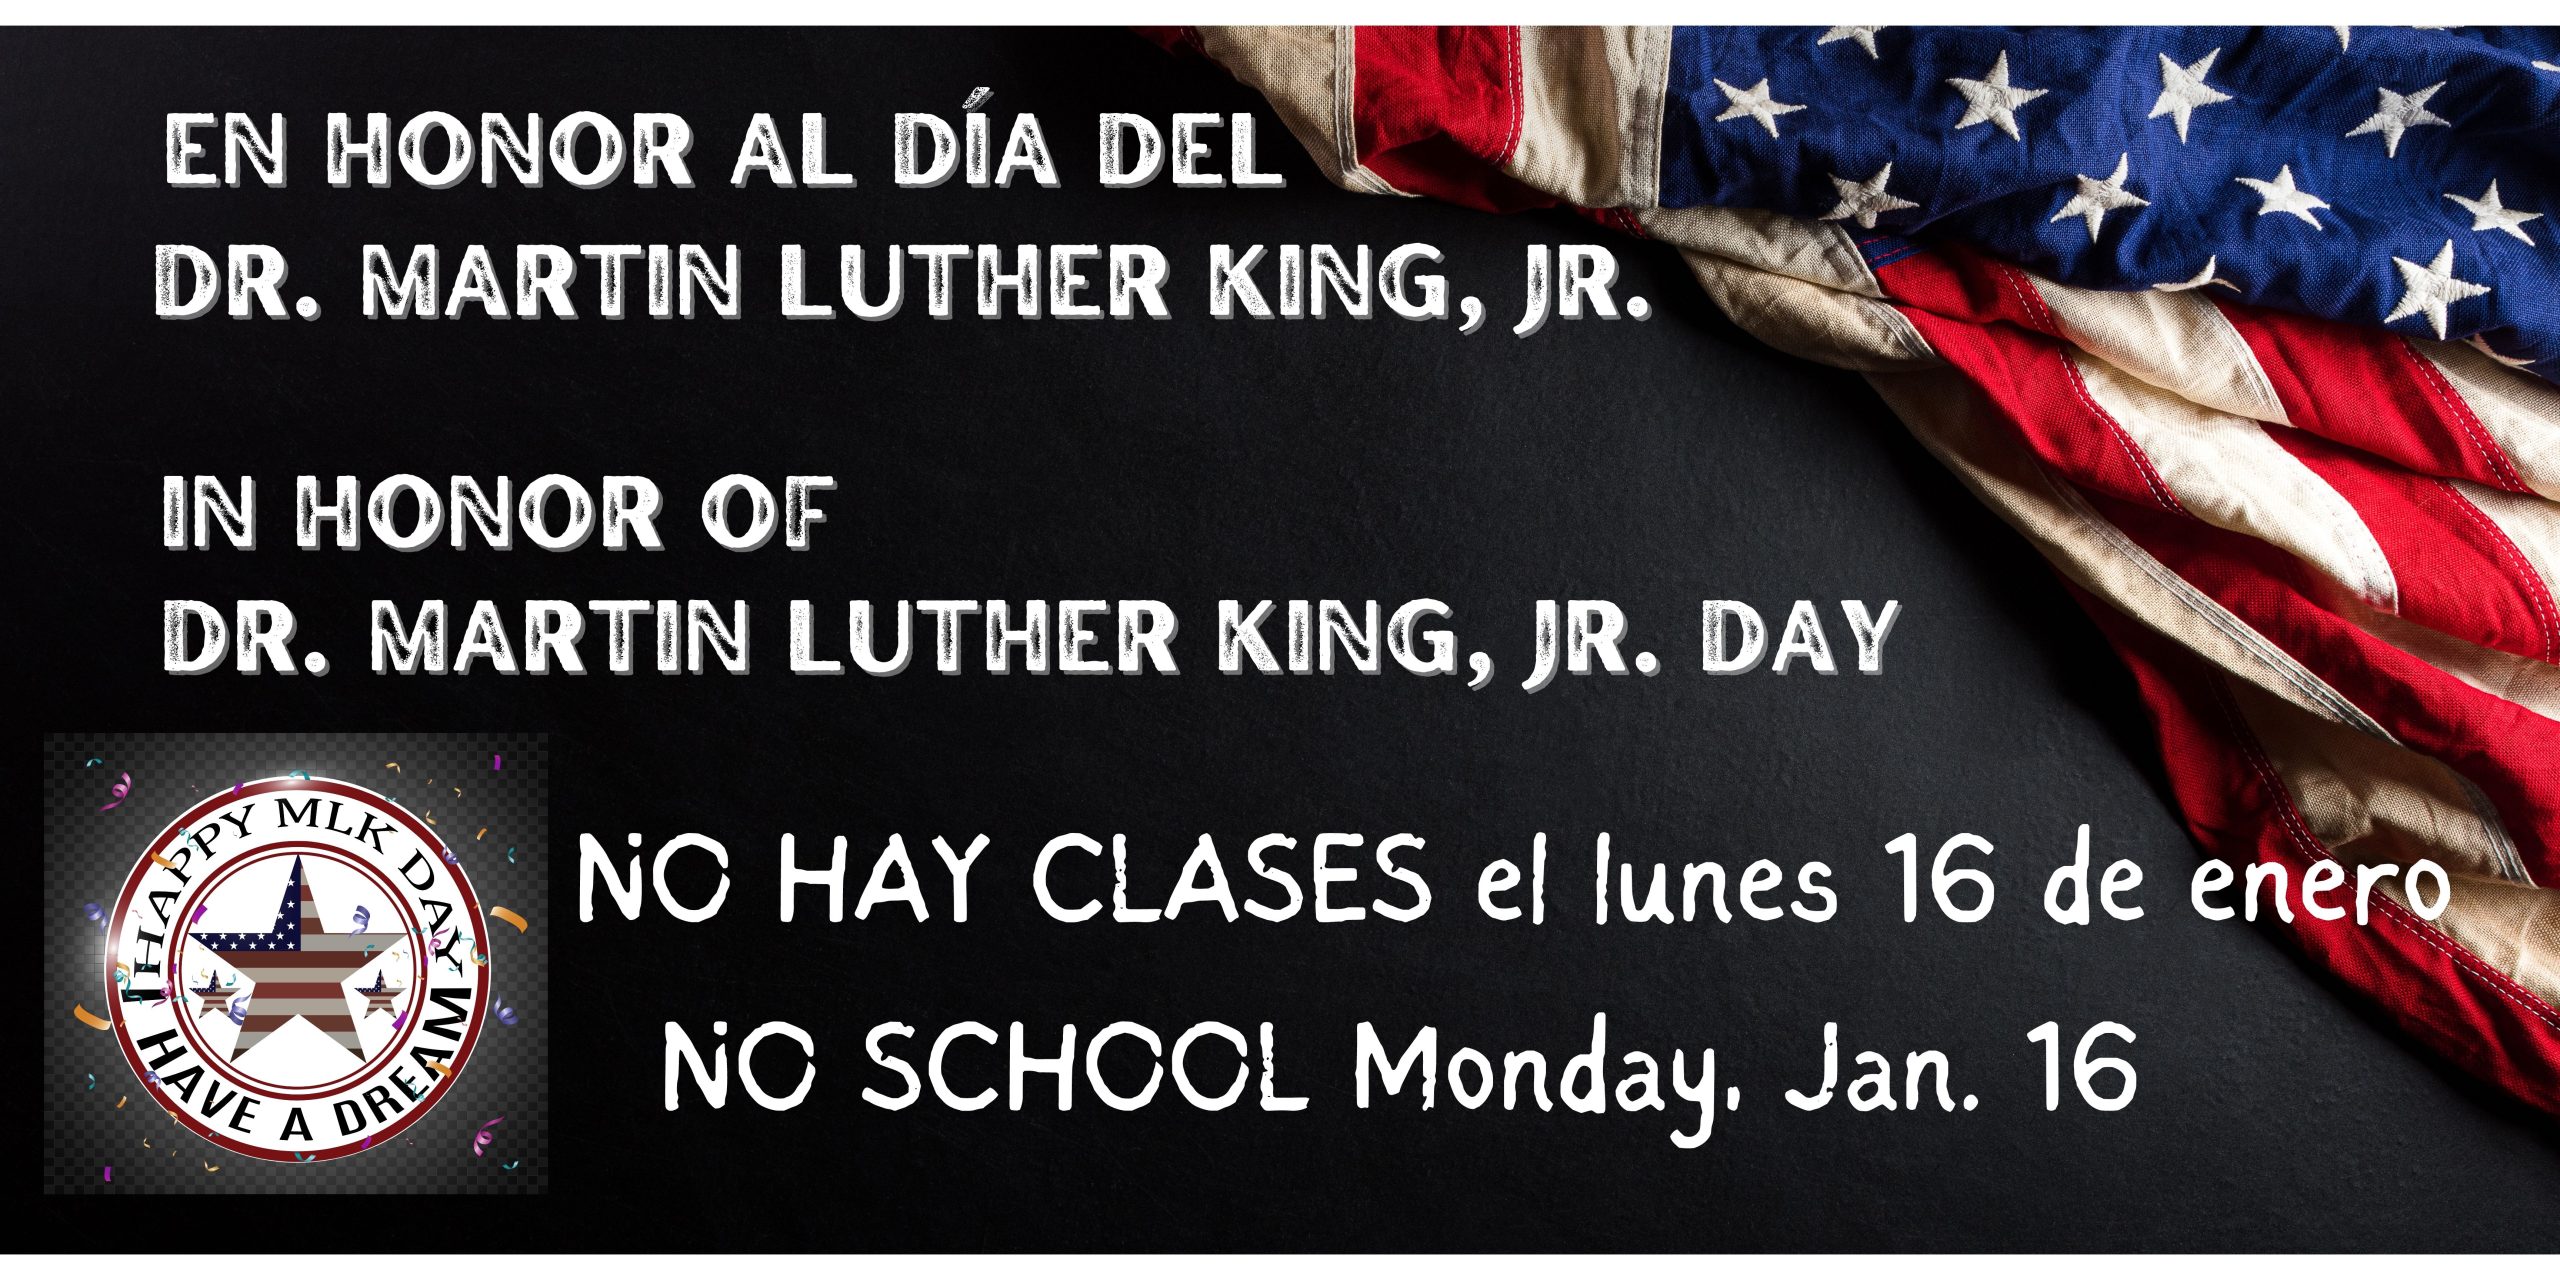 Black background with American flag in the top right corner. White text says, "In honor of/En honor al Día del Dr. Martin Luther King, Jr. Day" and "NO SCHOOL Monday, January 16" and "NO HAY CLASES el lunes 16 del enero." A white insignia in the bottom left corner that says, "Happy MLK Day" and "I Have a Dream"